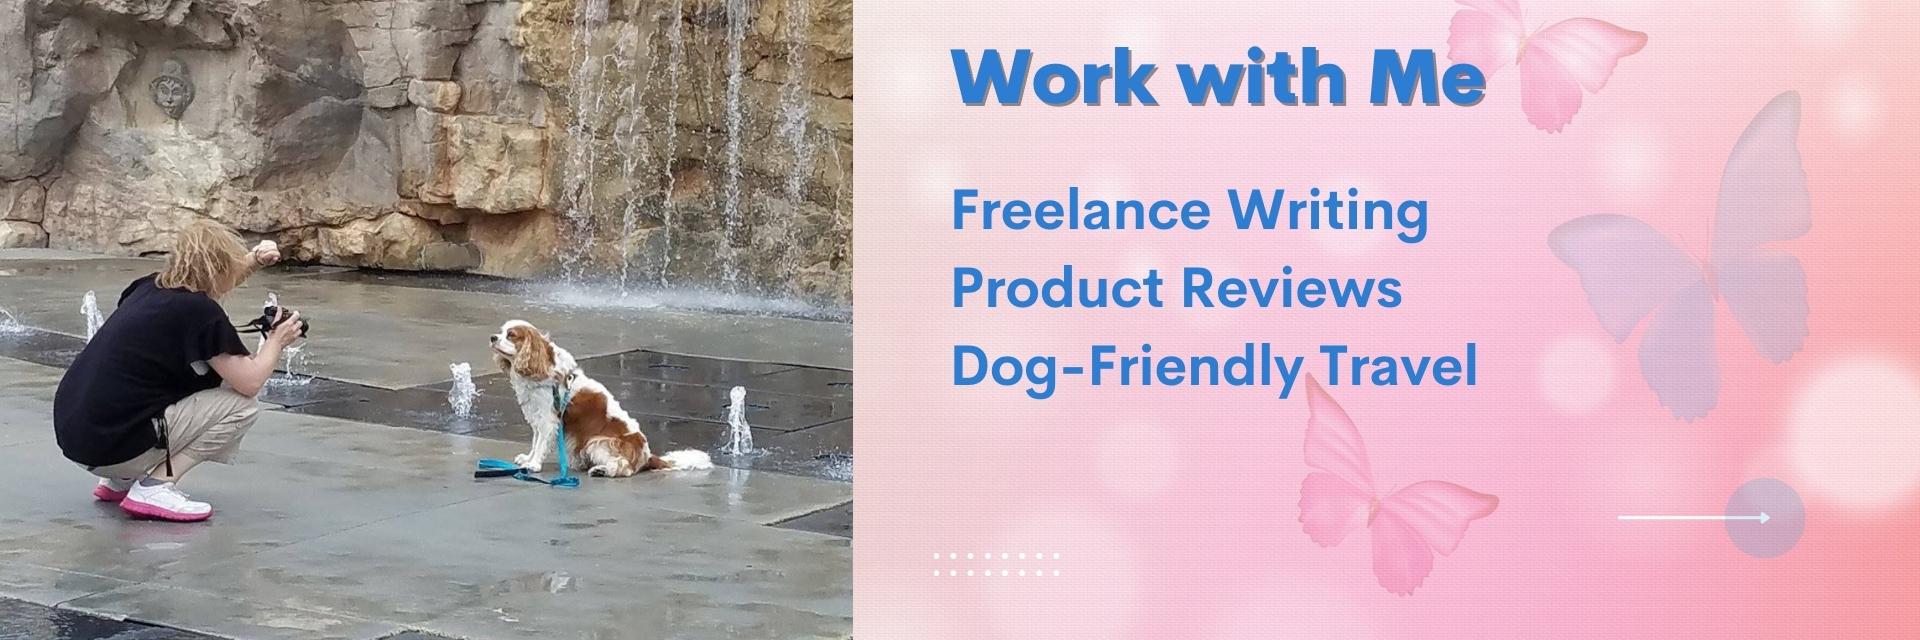 Pet freelance writers and bloggers